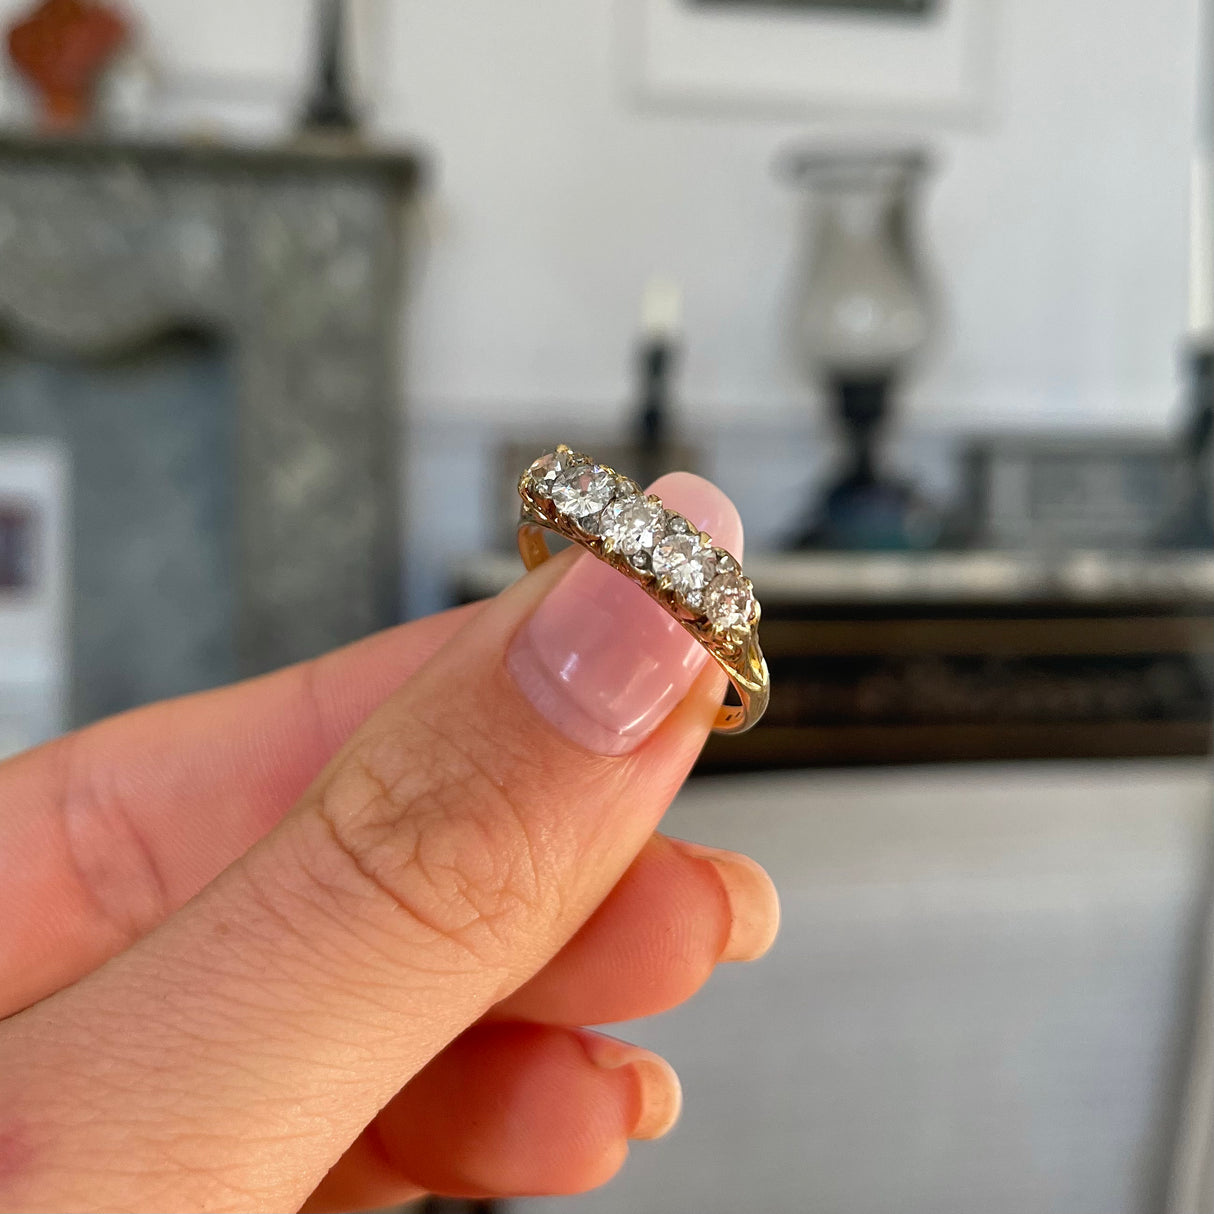 Antique five-stone diamond engagement ring,  held in fingers.